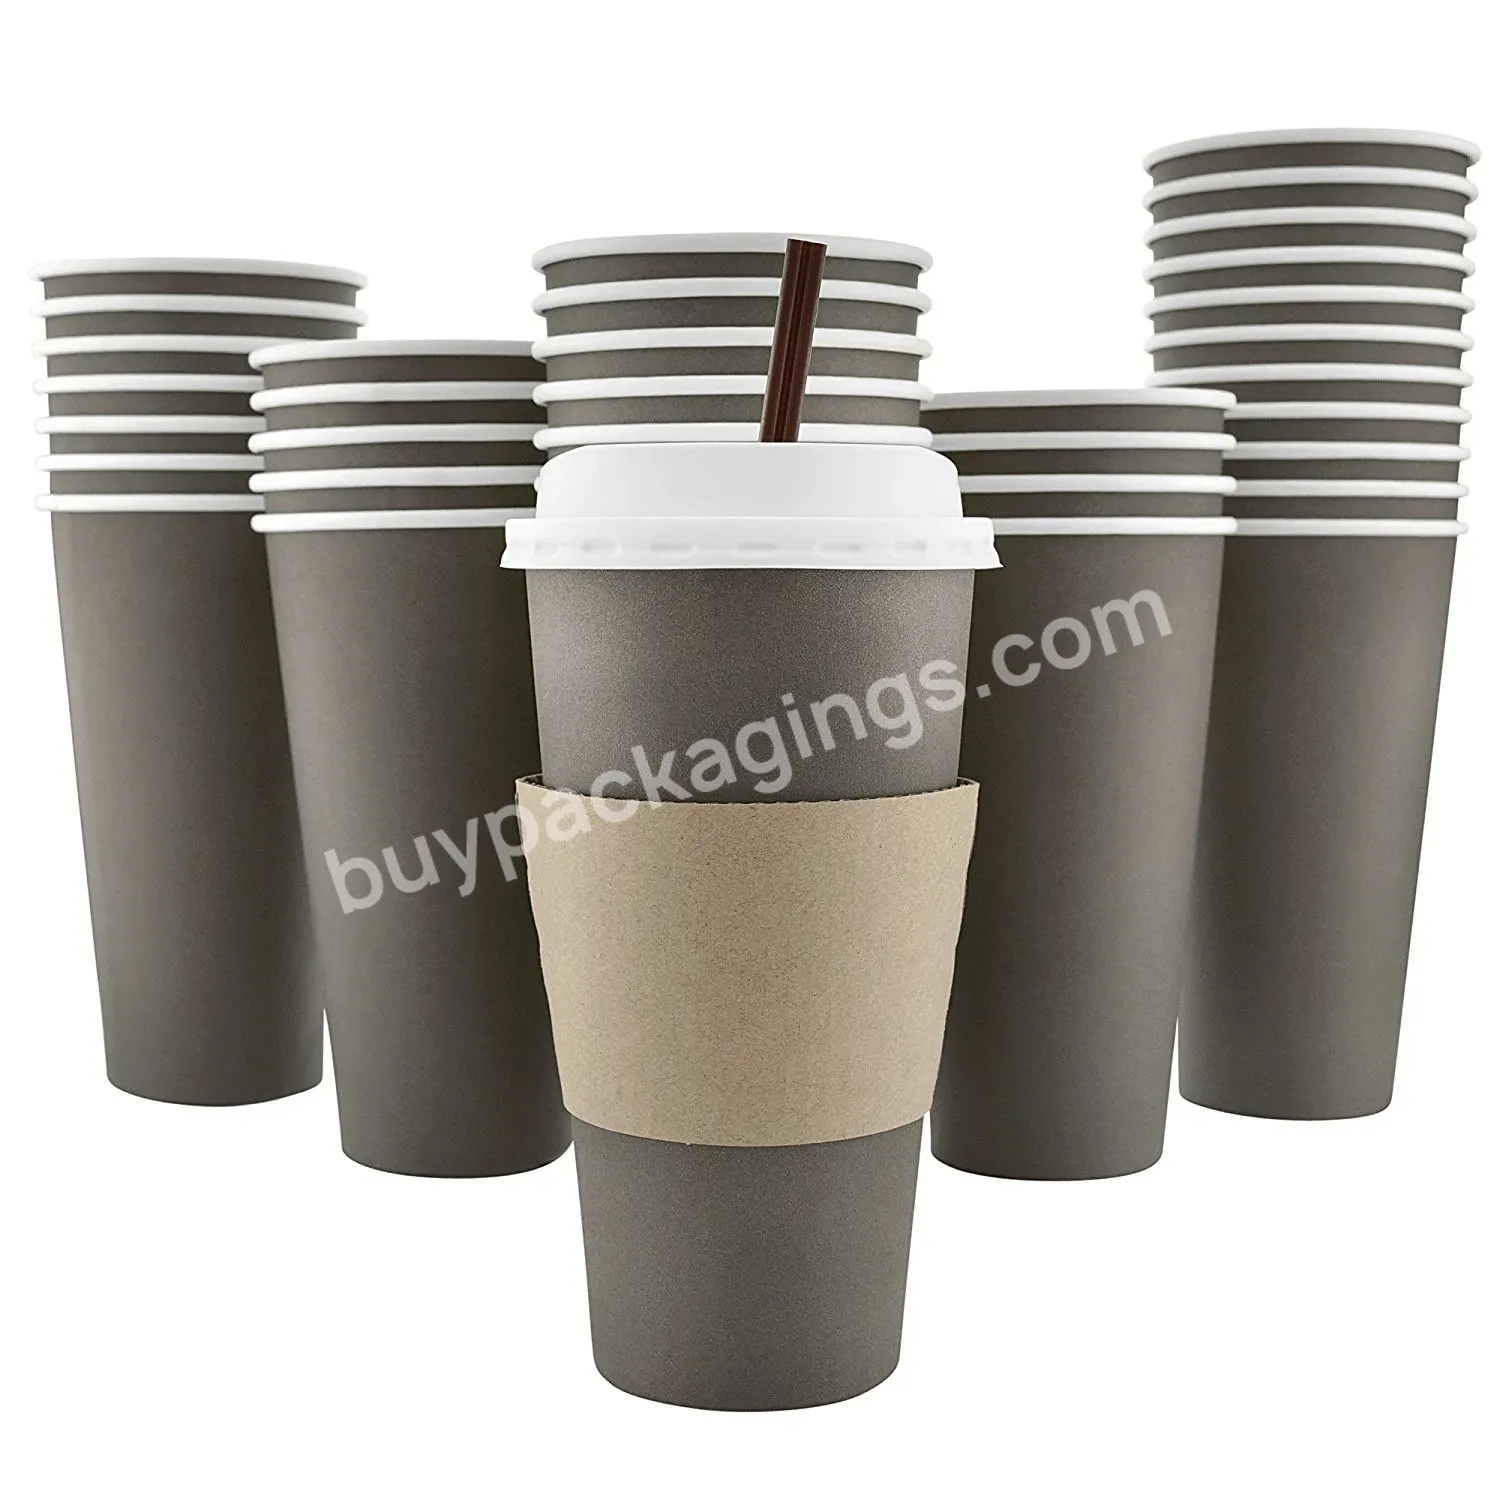 Take Away Coffee Cups Free Design Low Moq Customized Craft Paper Double Wall Paper Product Making Machinery Tea Cup Custom Size - Buy White Blank Paper Cups,Tea Cup Paper,Paper Cups For Soda.